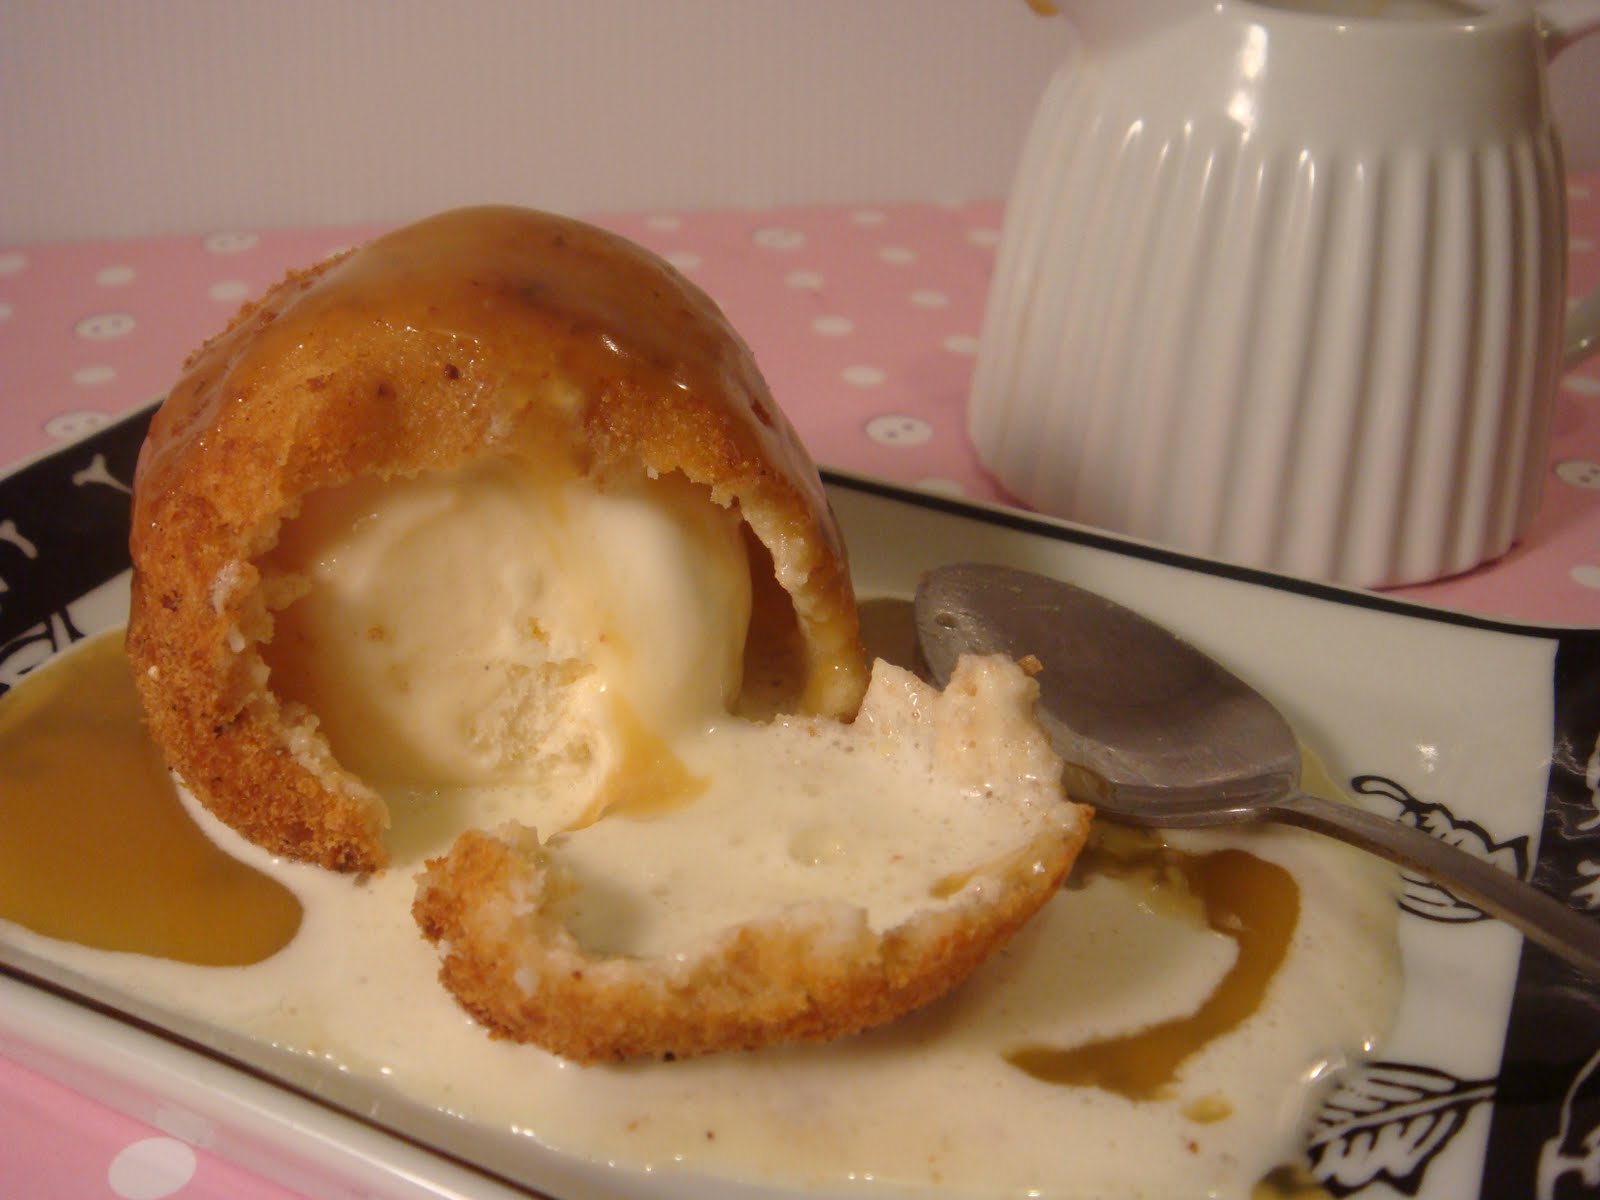 Deep fried ice cream: Hard on the outside, frozen on the inside